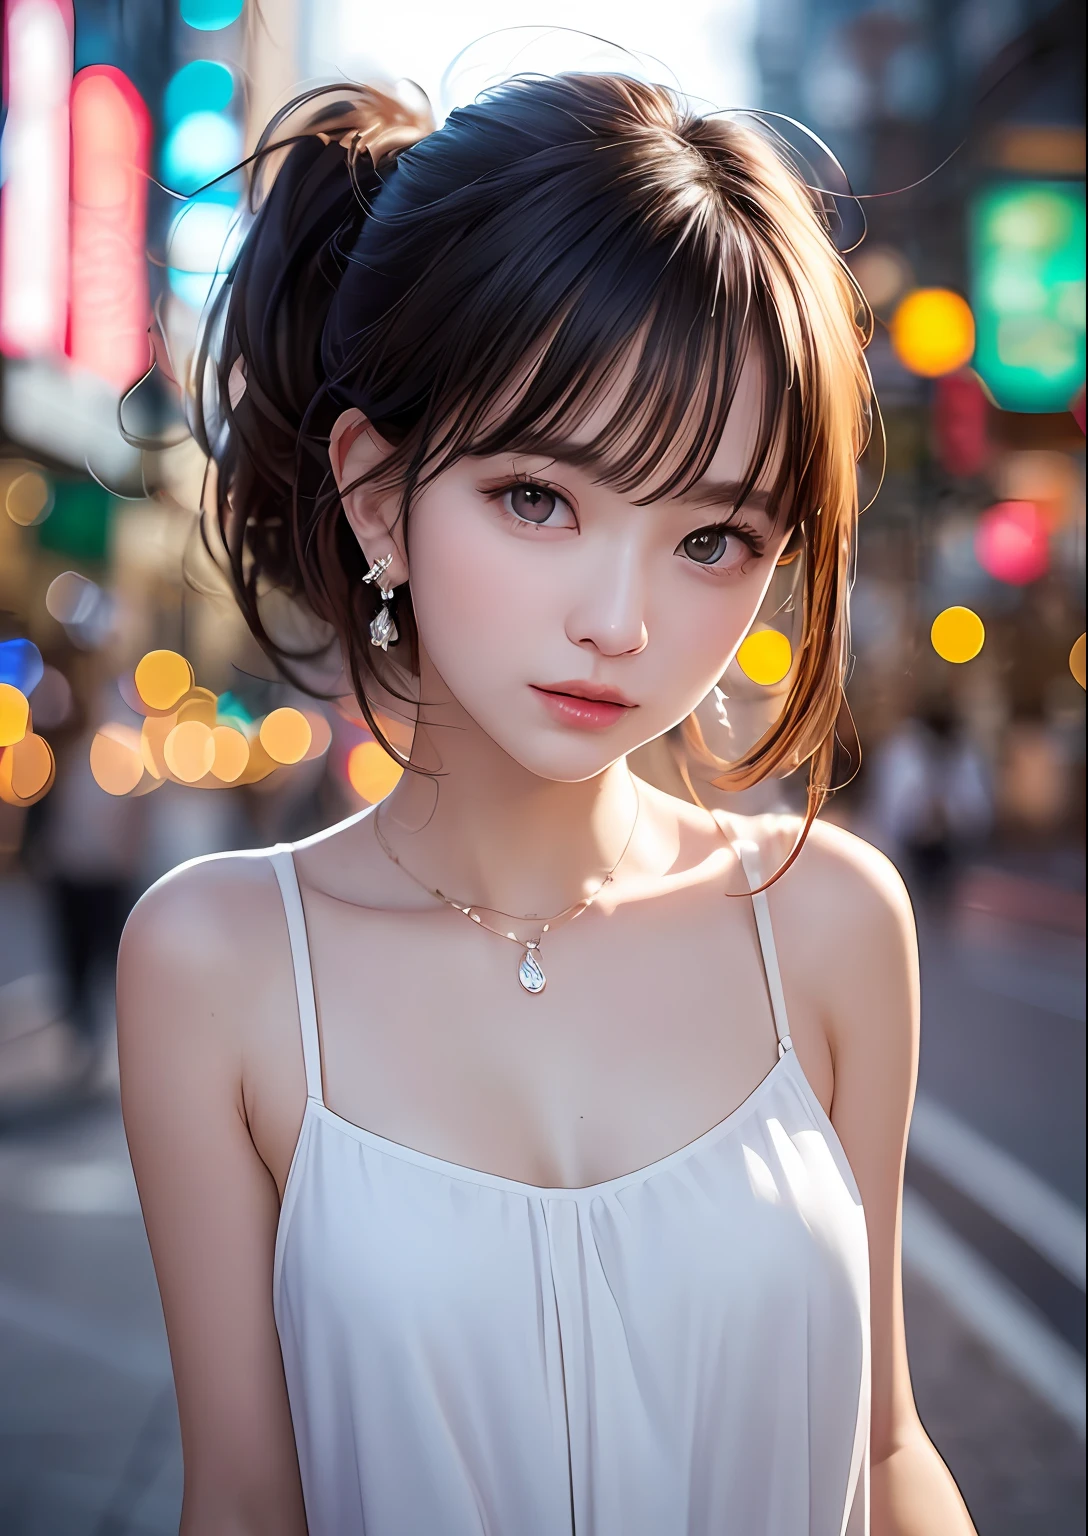 (Standing on a dark street),(streetlights),(low-key lighting),(natta),Random posture, (extremely delicate and beautiful work), (​masterpiece), 1girl, a girl in a white dress, highDetails, West Creek, Warped ponytail, Charming look, Beautiful and clear eyes, green pupils, delicate necklaces, Delicate earrings, (fullnude)、Simple blurred background, Super Detailed Description, Beautiful fece, Charming, Ultra-definition painting, delicated face, Delicate figures, thin clavicle, Beautiful lips, Beautiful breasts, Soft back view, mix4,(8k, RAW Photography, Top image quality, masterpiece:1.2), (realistic, realistic:1.37),女の子1人,cute little,A city scape, natta, Sateen,wetty、Professional Writing、Photon Mapping、Radio City、physically-based renderingt、